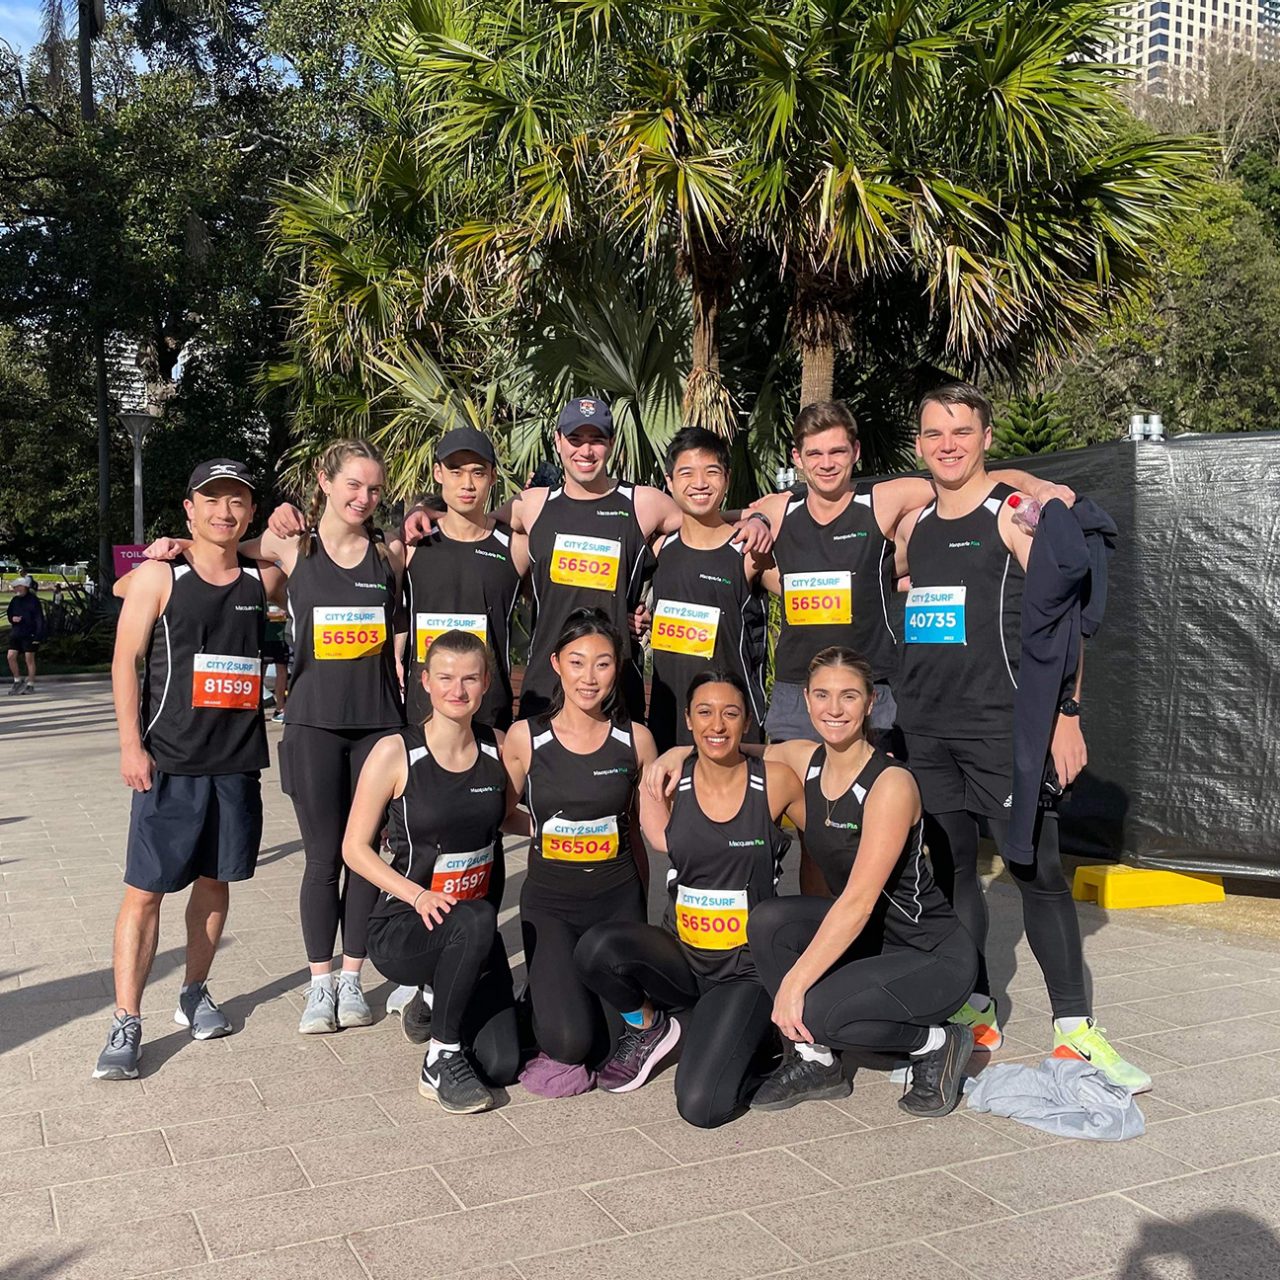 Allen and team at the City2Surf